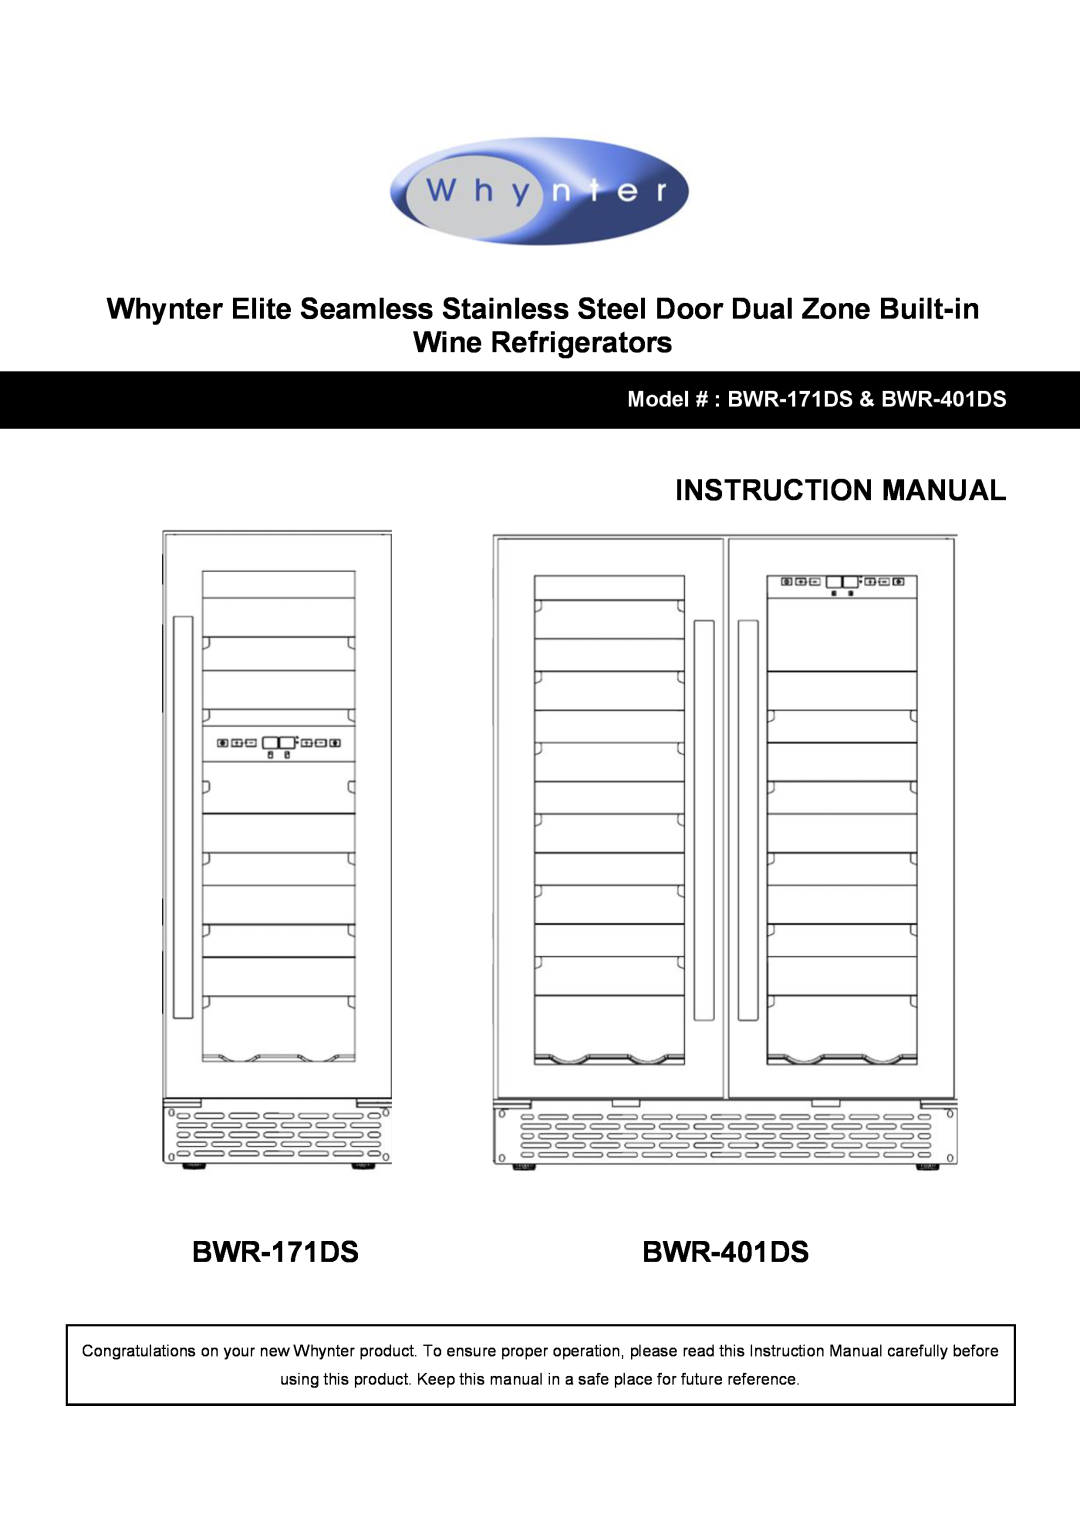 Whynter BWR-171DS, DWR-401DS manual Whynter Elite Seamless Stainless Steel Door Dual Zone Built-in, Wine Refrigerators 